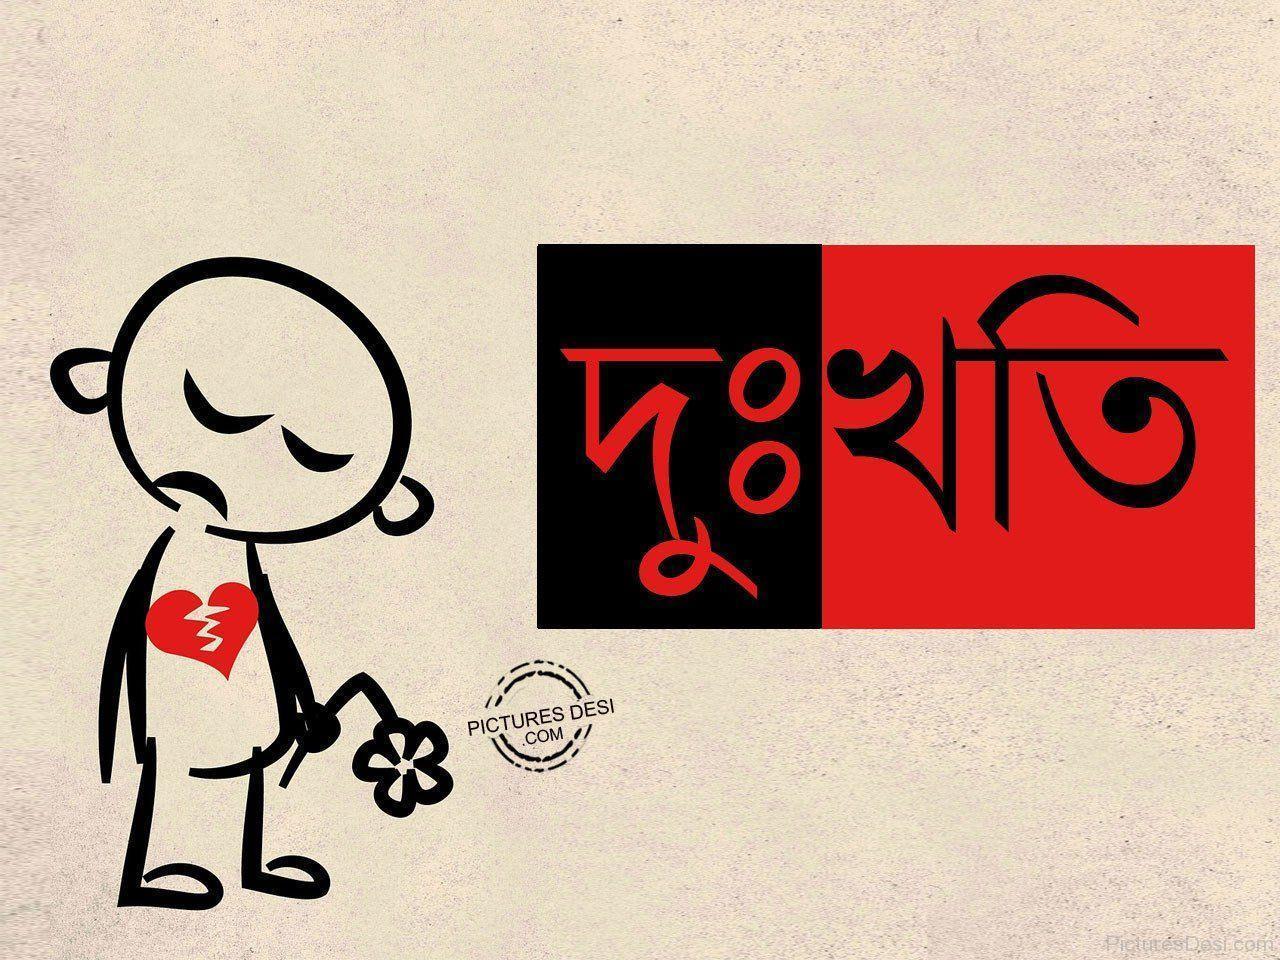 Sorry Bengali Picture, Image